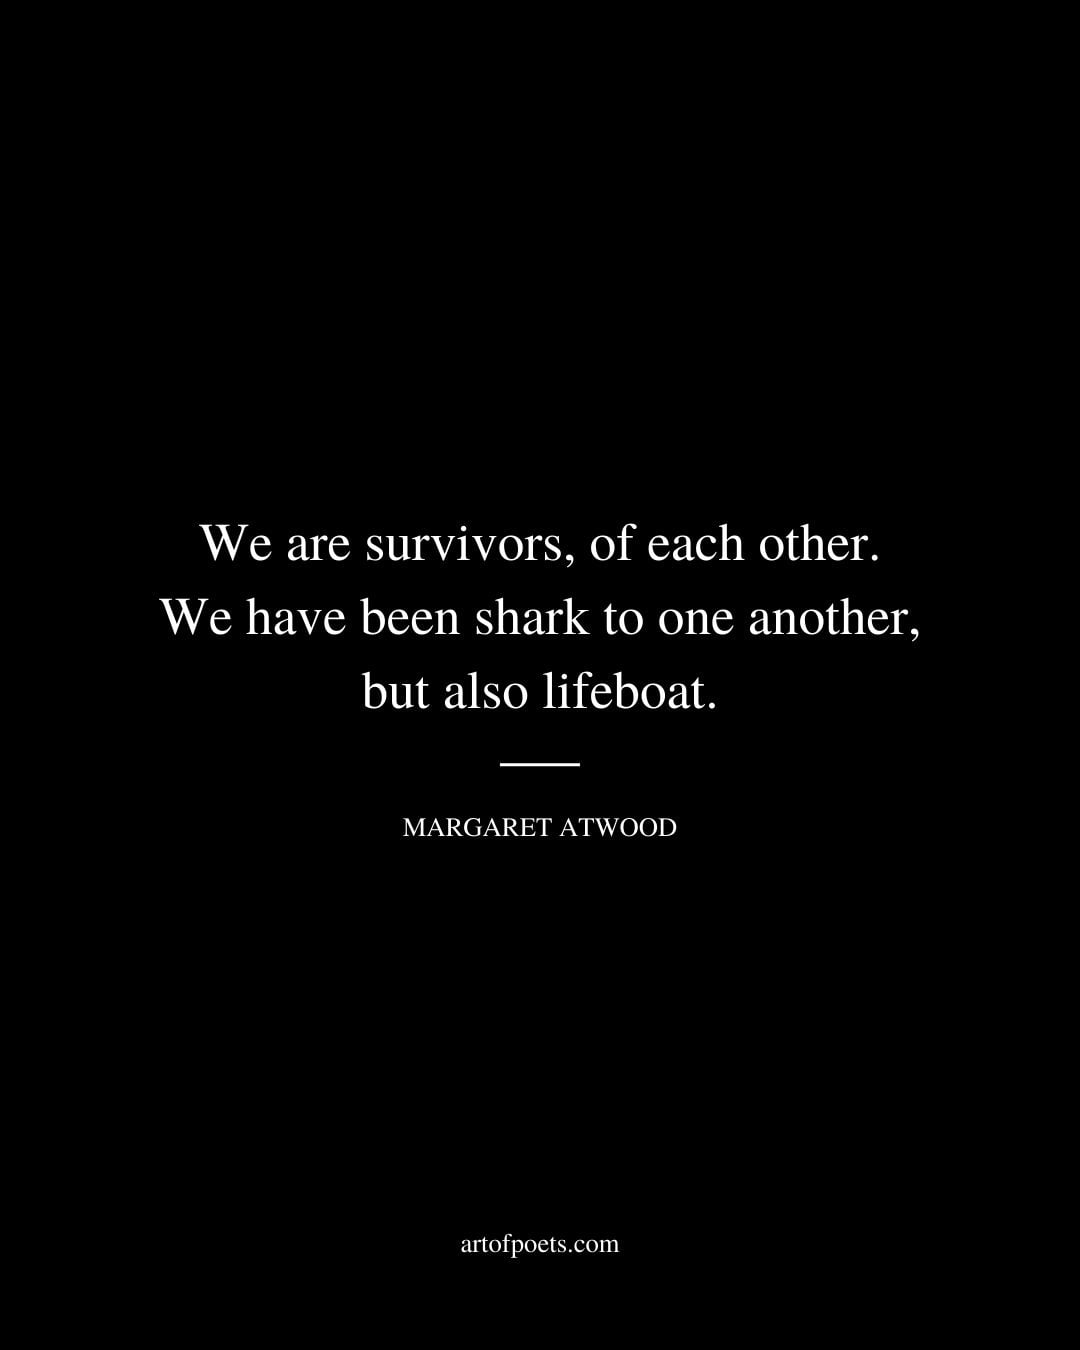 We are survivors of each other. We have been shark to one another but also lifeboat. Margaret Atwood